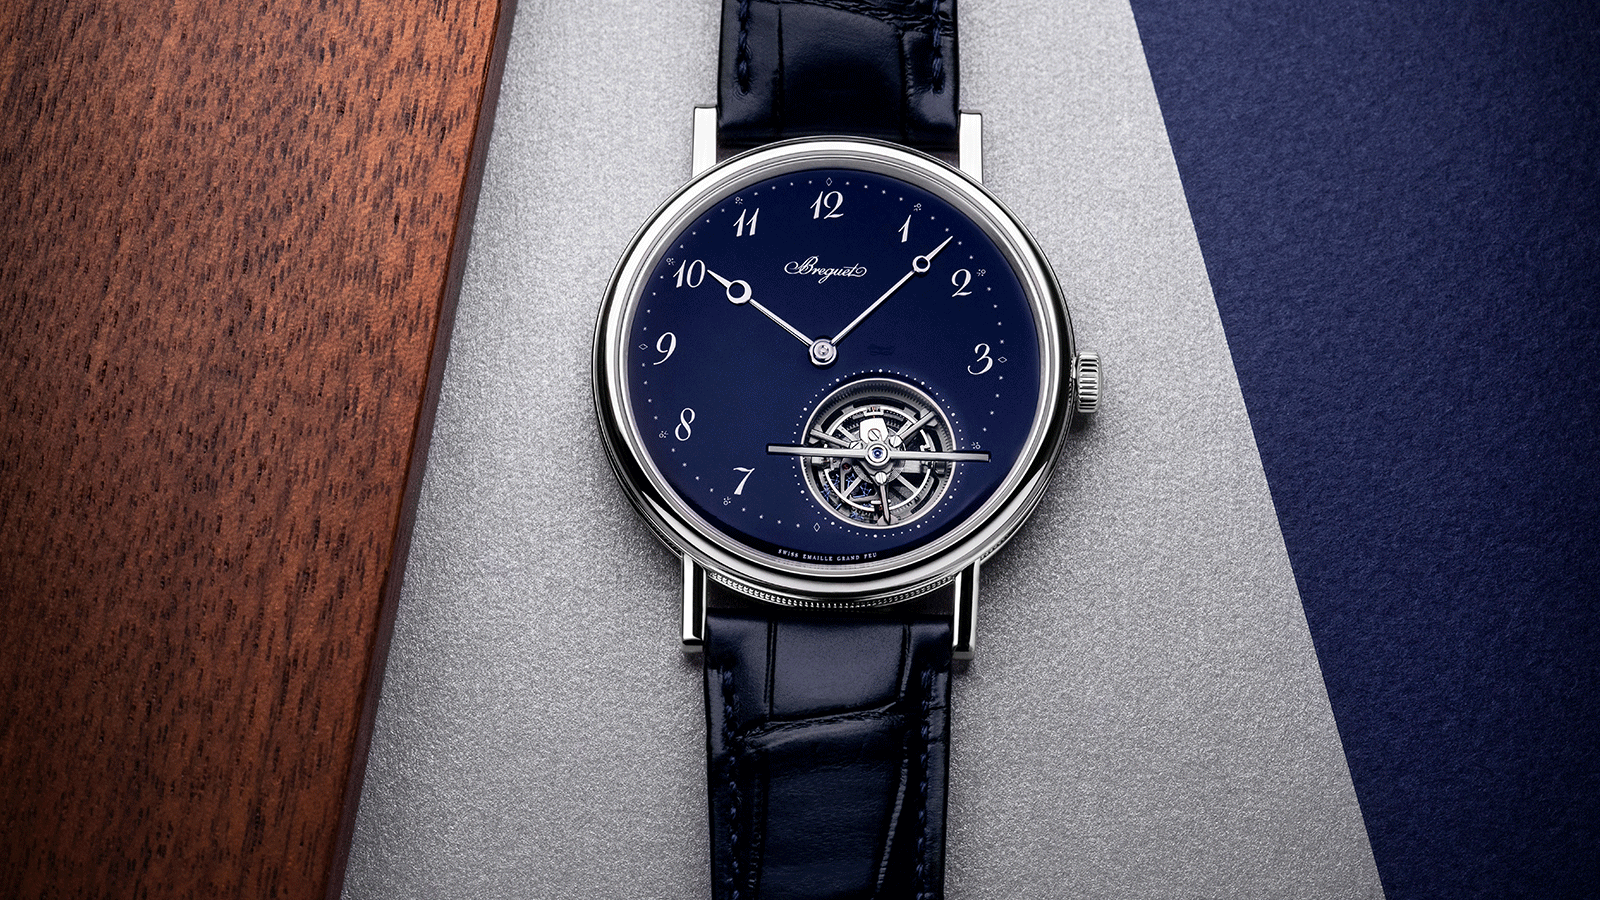 Classique Extra-Thin Self-Winding Tourbillon 5367 - Breguet adorns the dial of its Extra-Thin Self-Winding Tourbillon with a touch of deep blue, by using the traditional grand feu enamel technique. There are a limited number of artisans still capable of mastering this age-old process, which was dear to Abraham-Louis Breguet, as he appreciated the spotless aspect it conferred on watches. Not surprising, given that he had revolutionised watchmaking aesthetics by ridding watches of heavy and superfluous decoration. Today, Breguet keeps this art alive with a workshop entirely dedicated to enamelling.